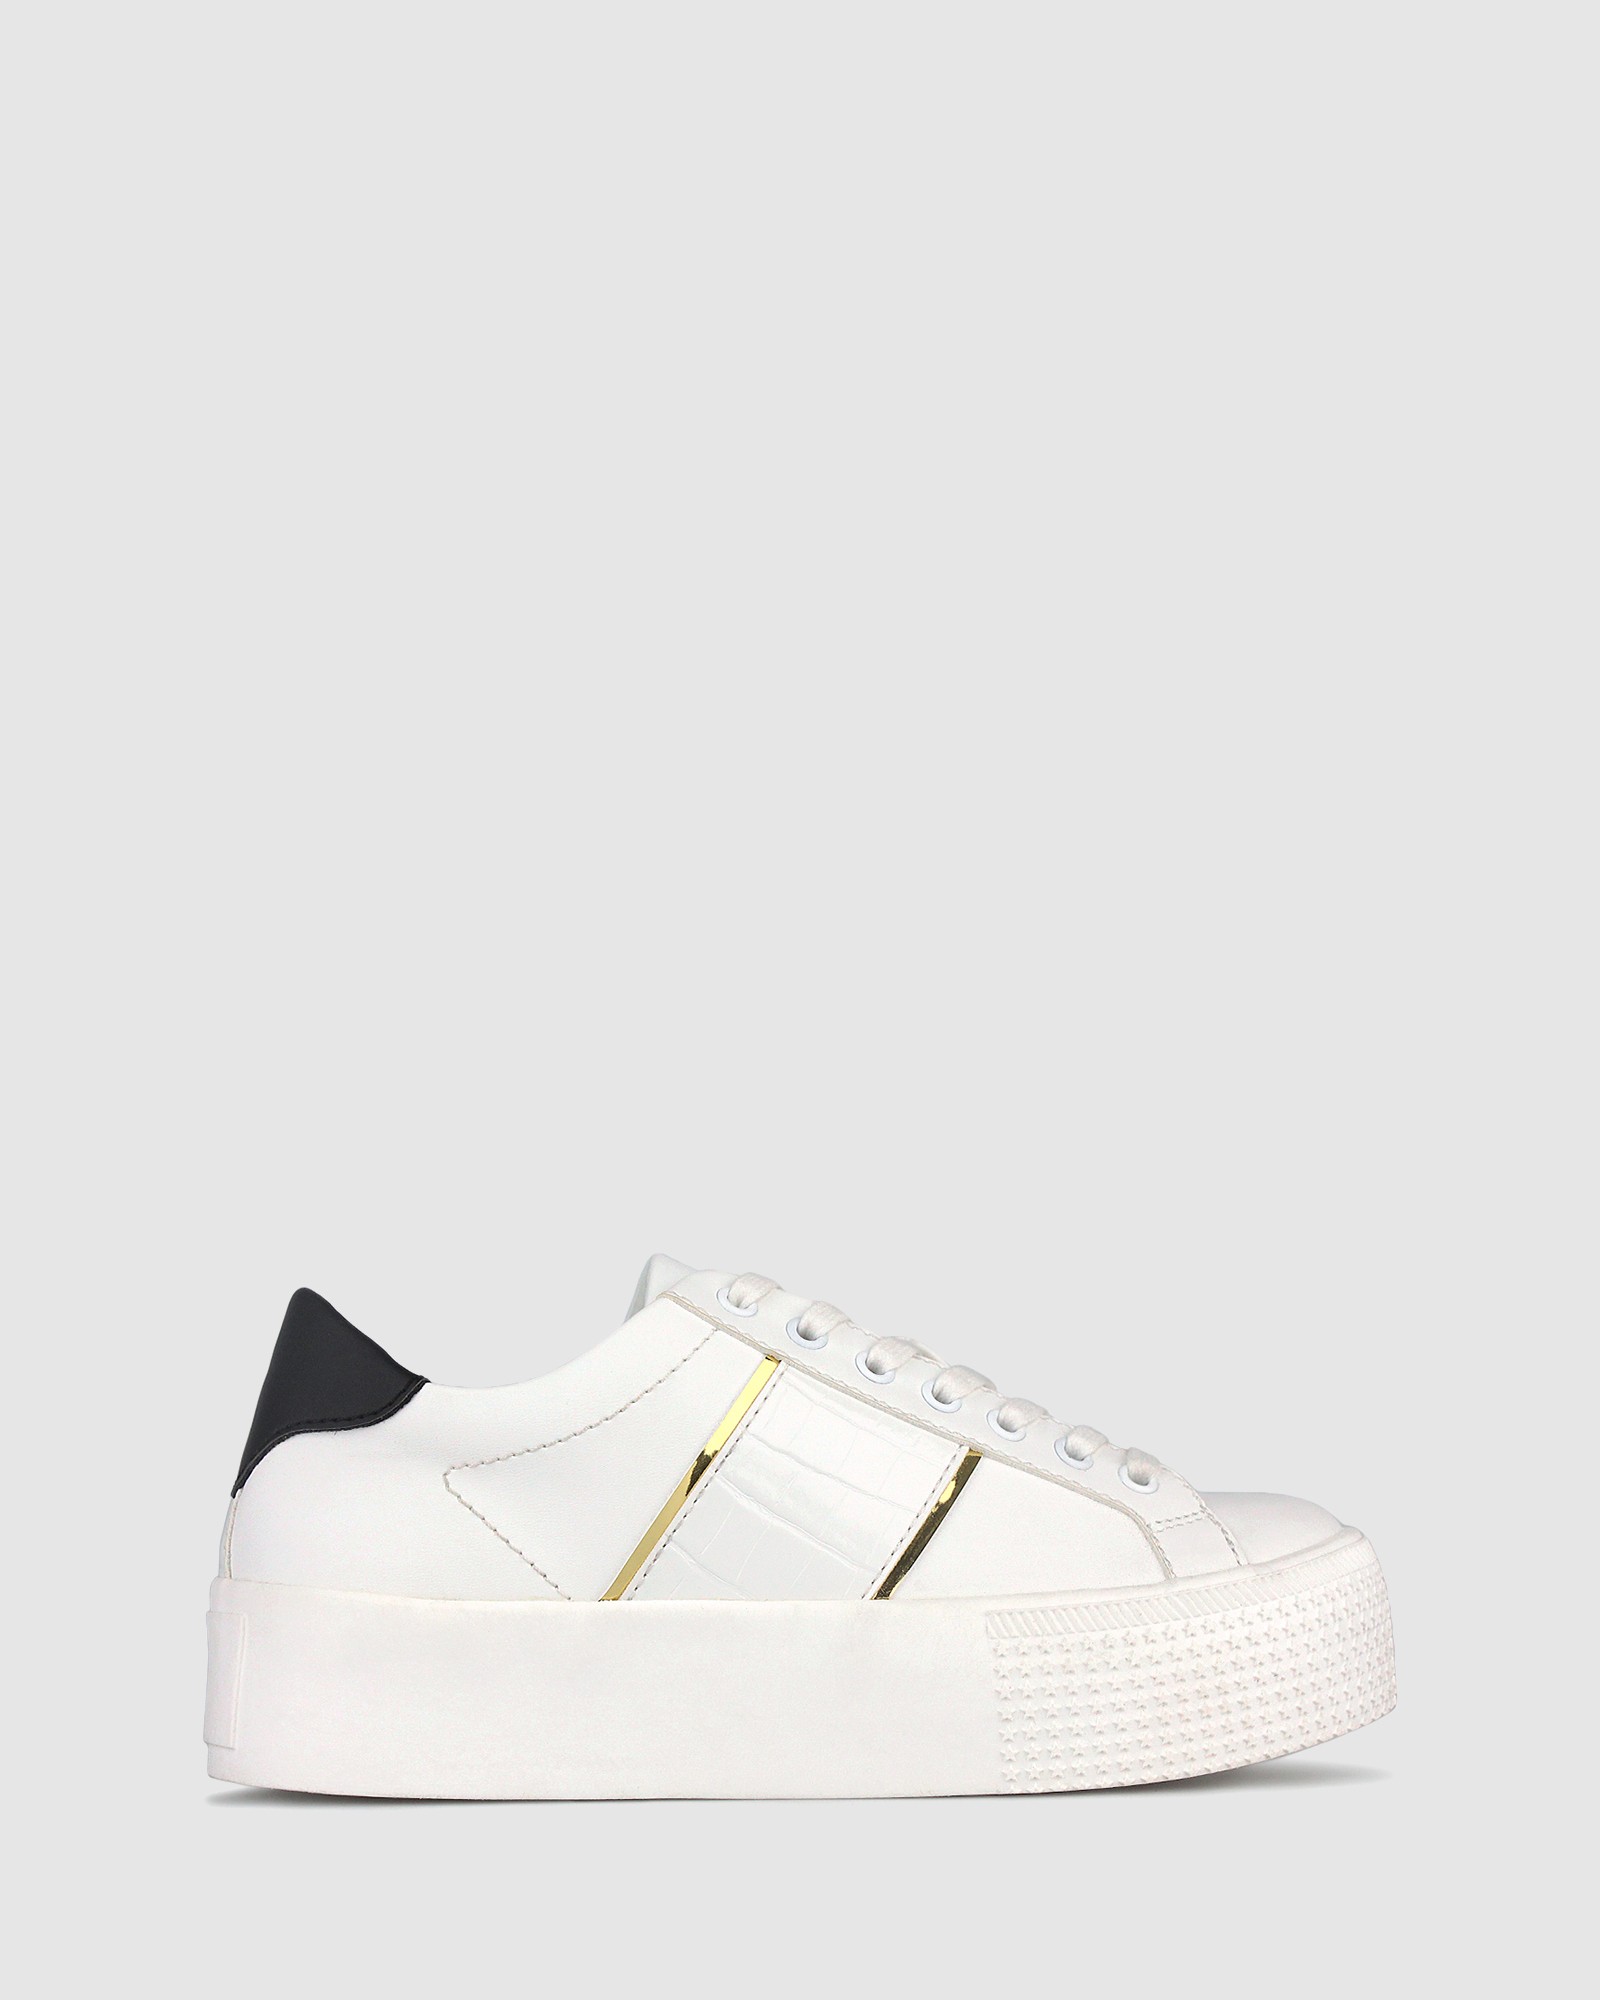 Wicked Flatform Sneakers White by Betts | ShoeSales